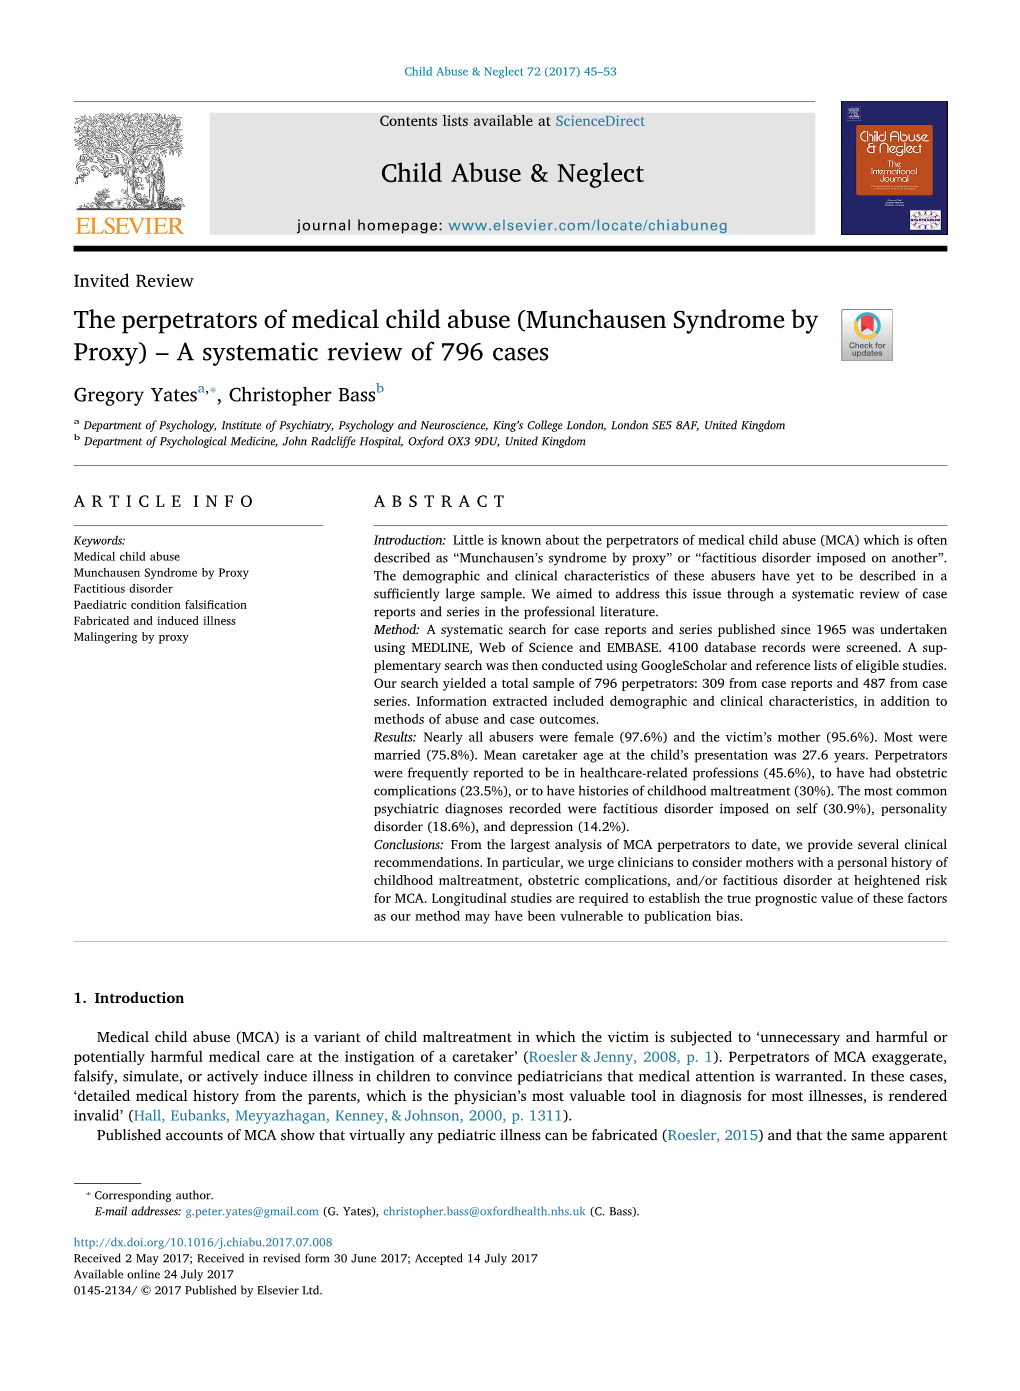 The Perpetrators of Medical Child Abuse (Munchausen Syndrome by Proxy) – a Systematic Review of 796 Cases